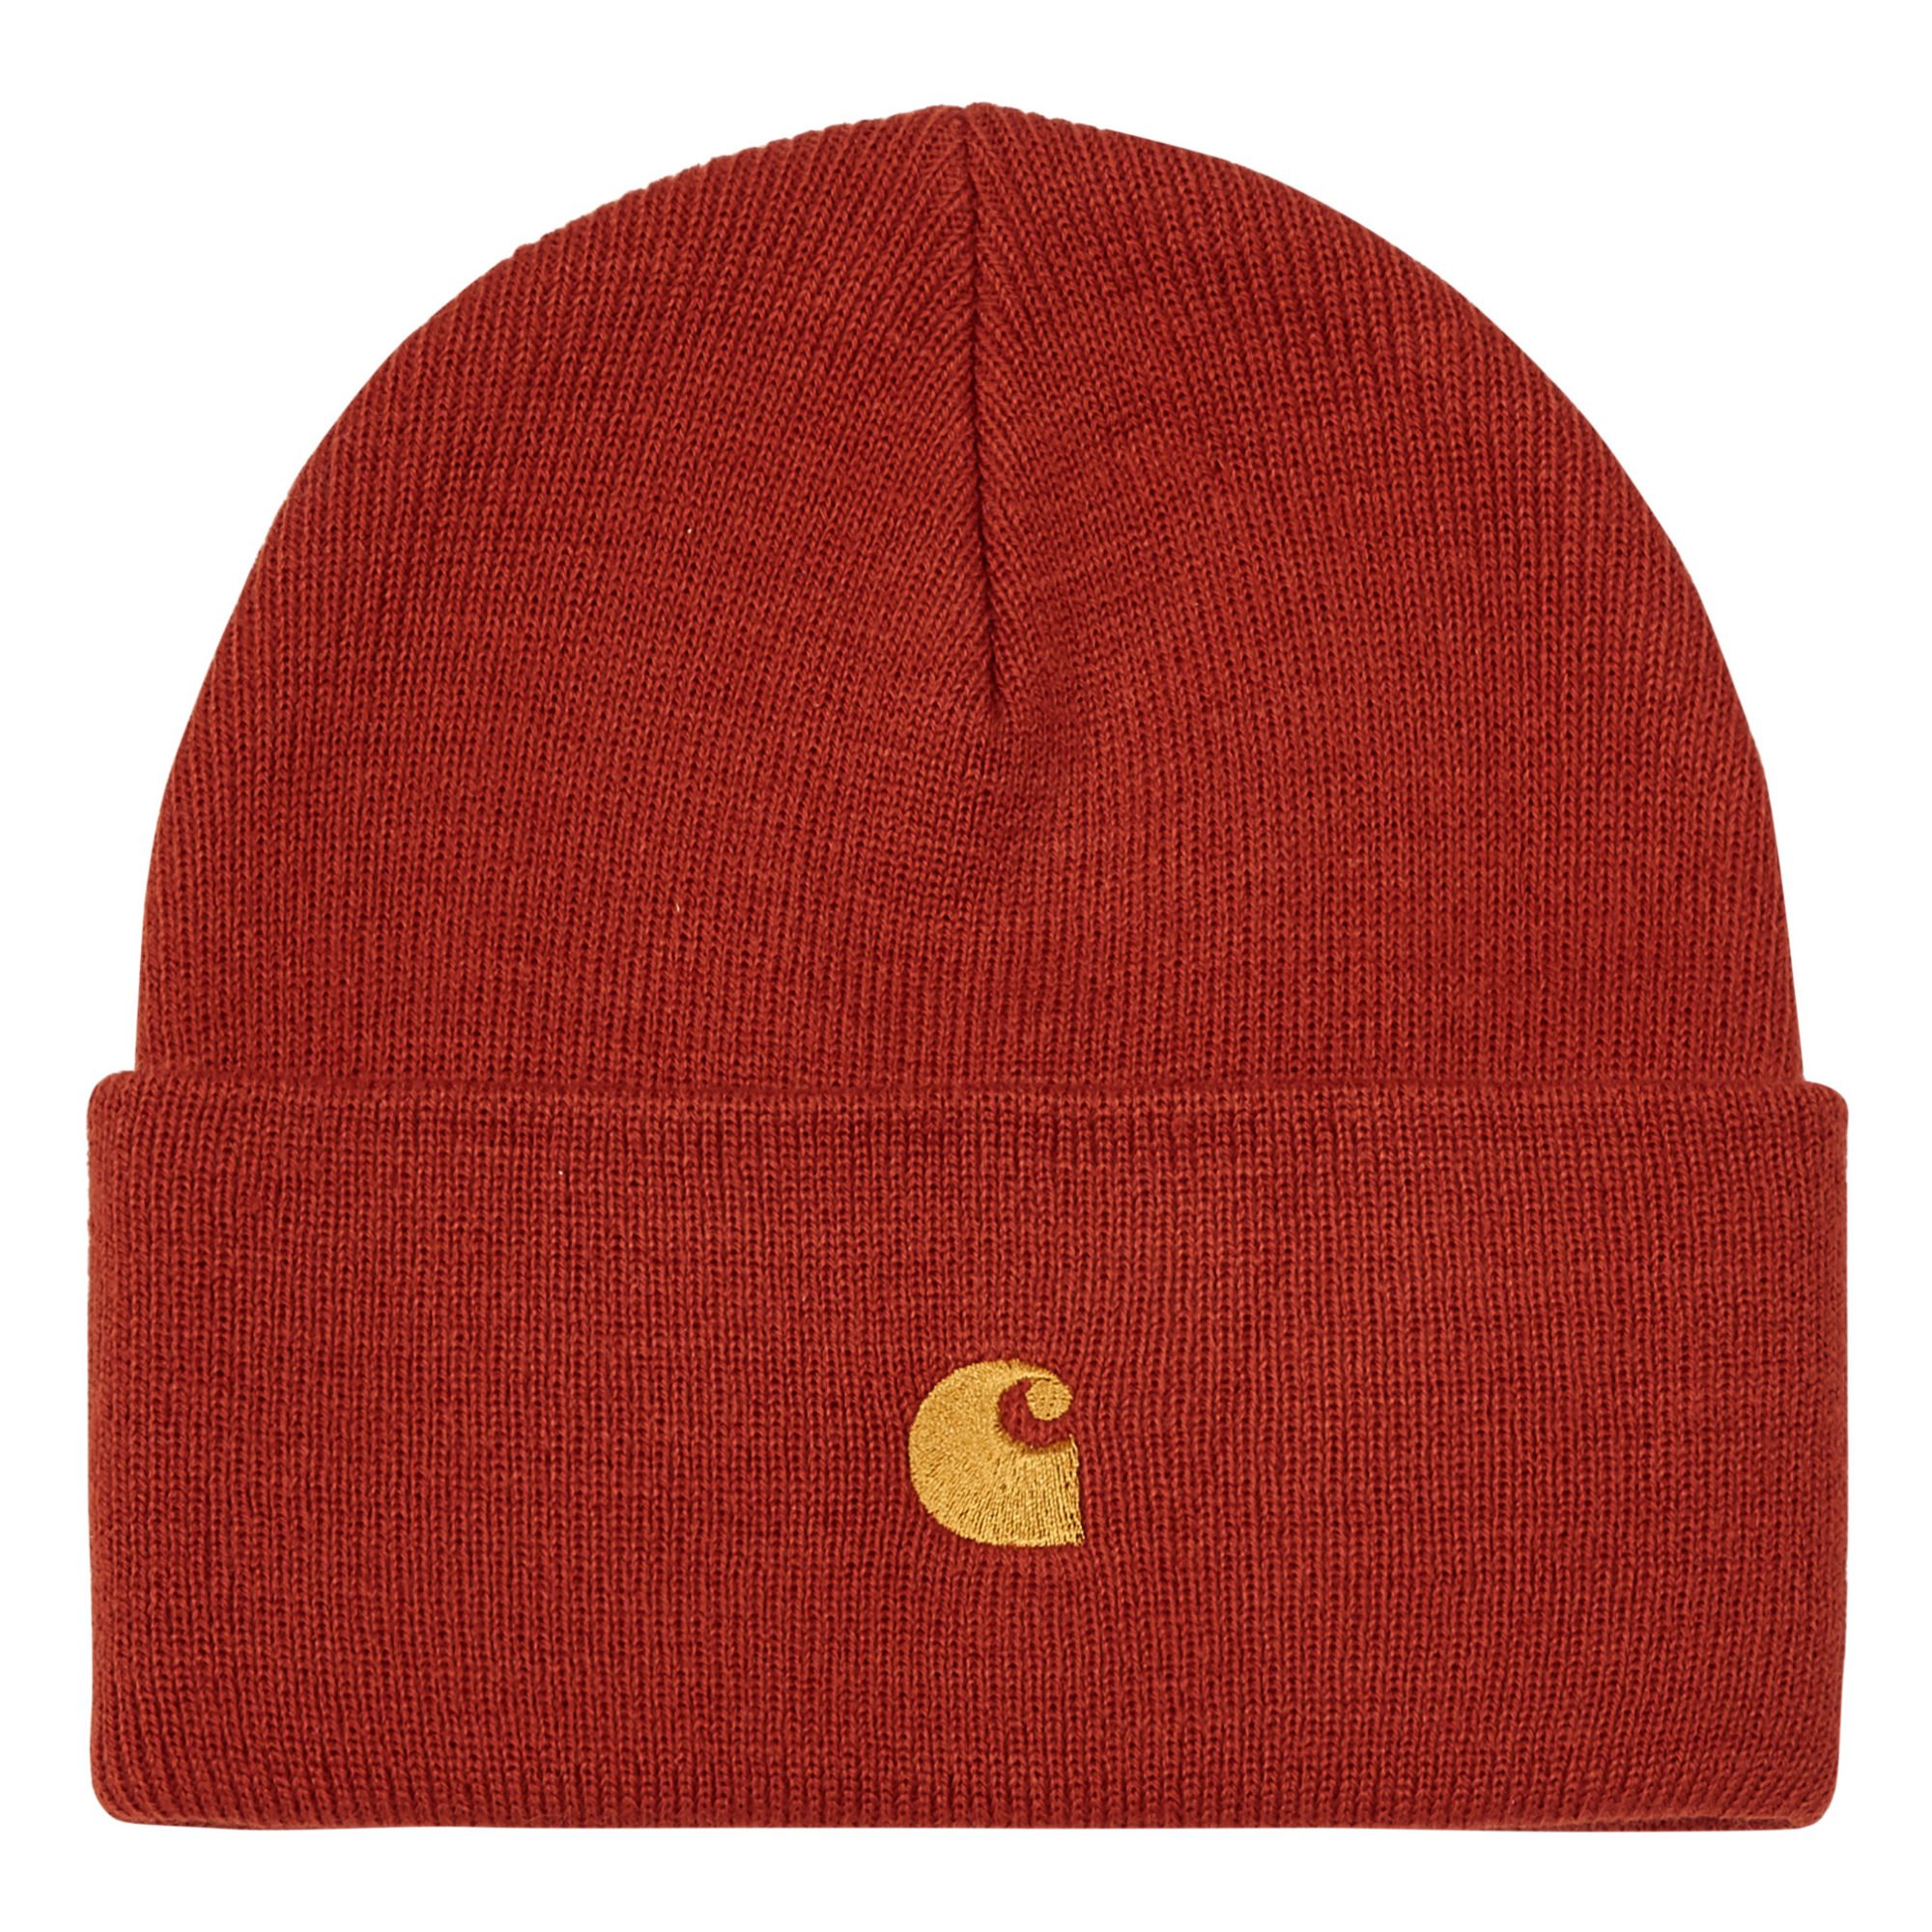 Carhartt WIP - Bonnet Chase - Homme - Rouge